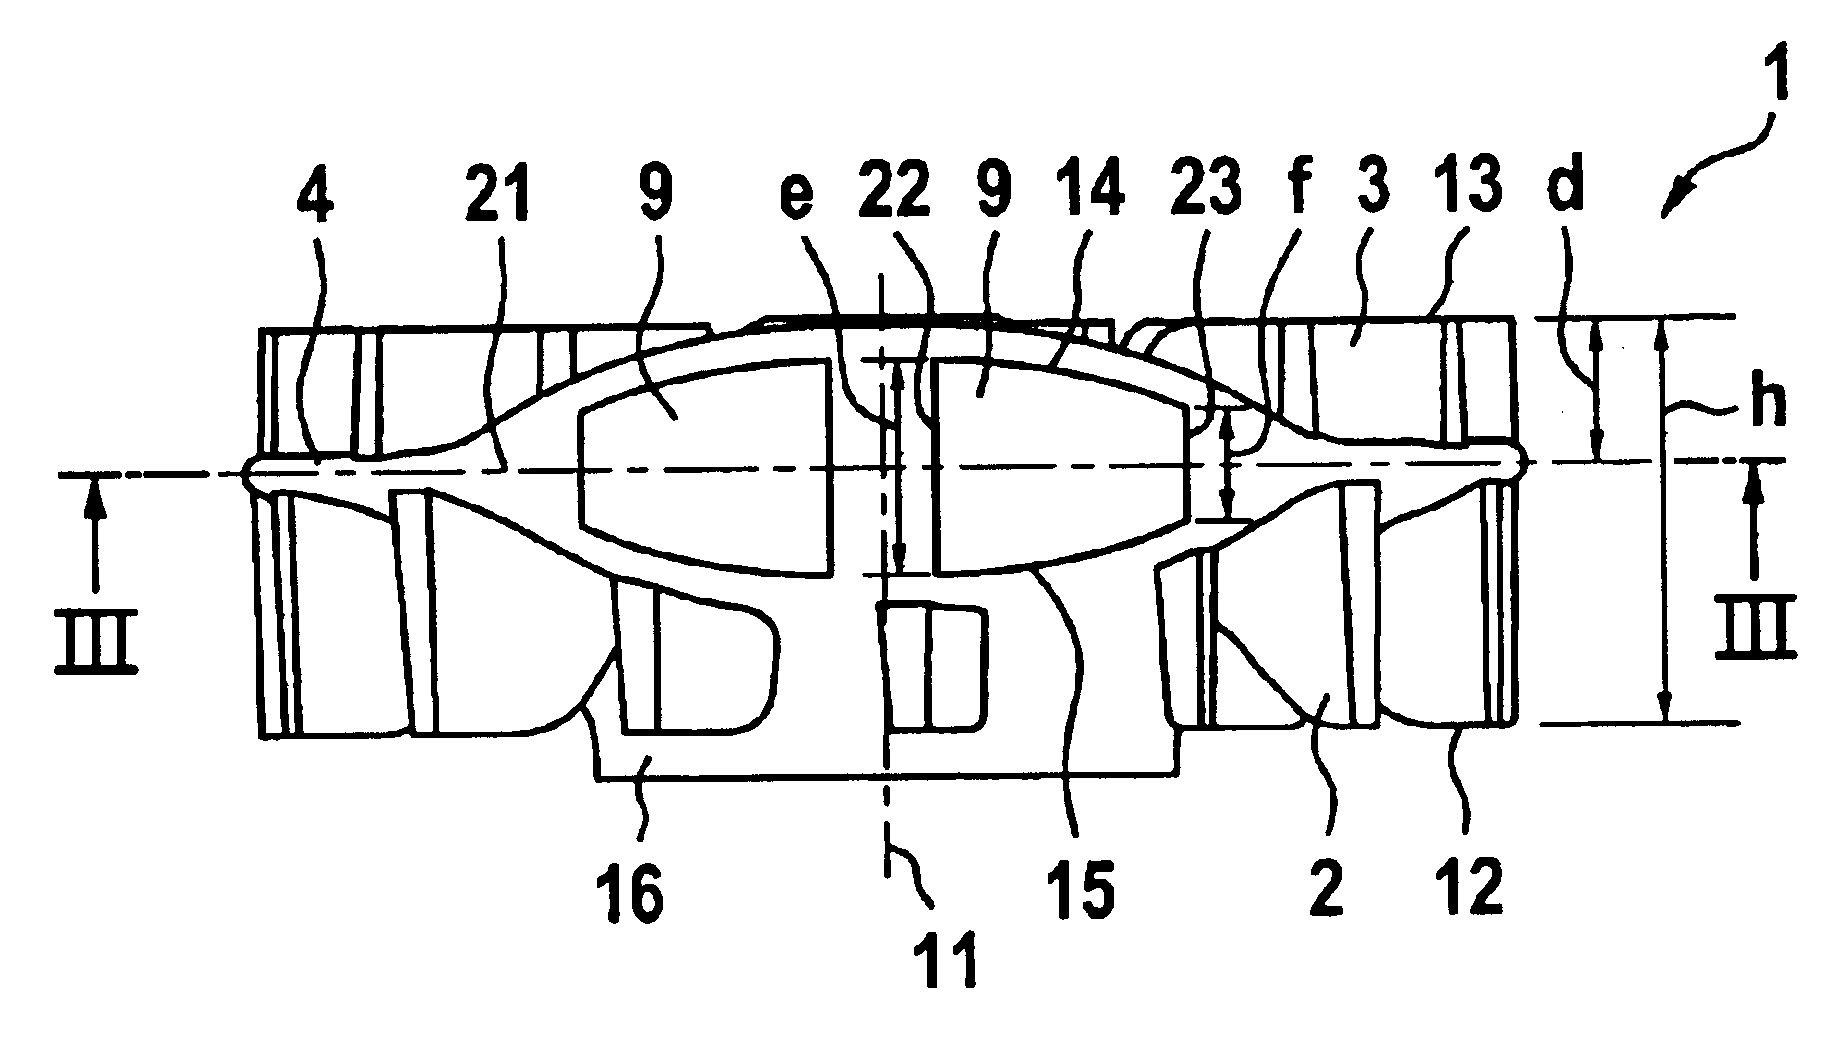 Flywheel for an internal combustion engine